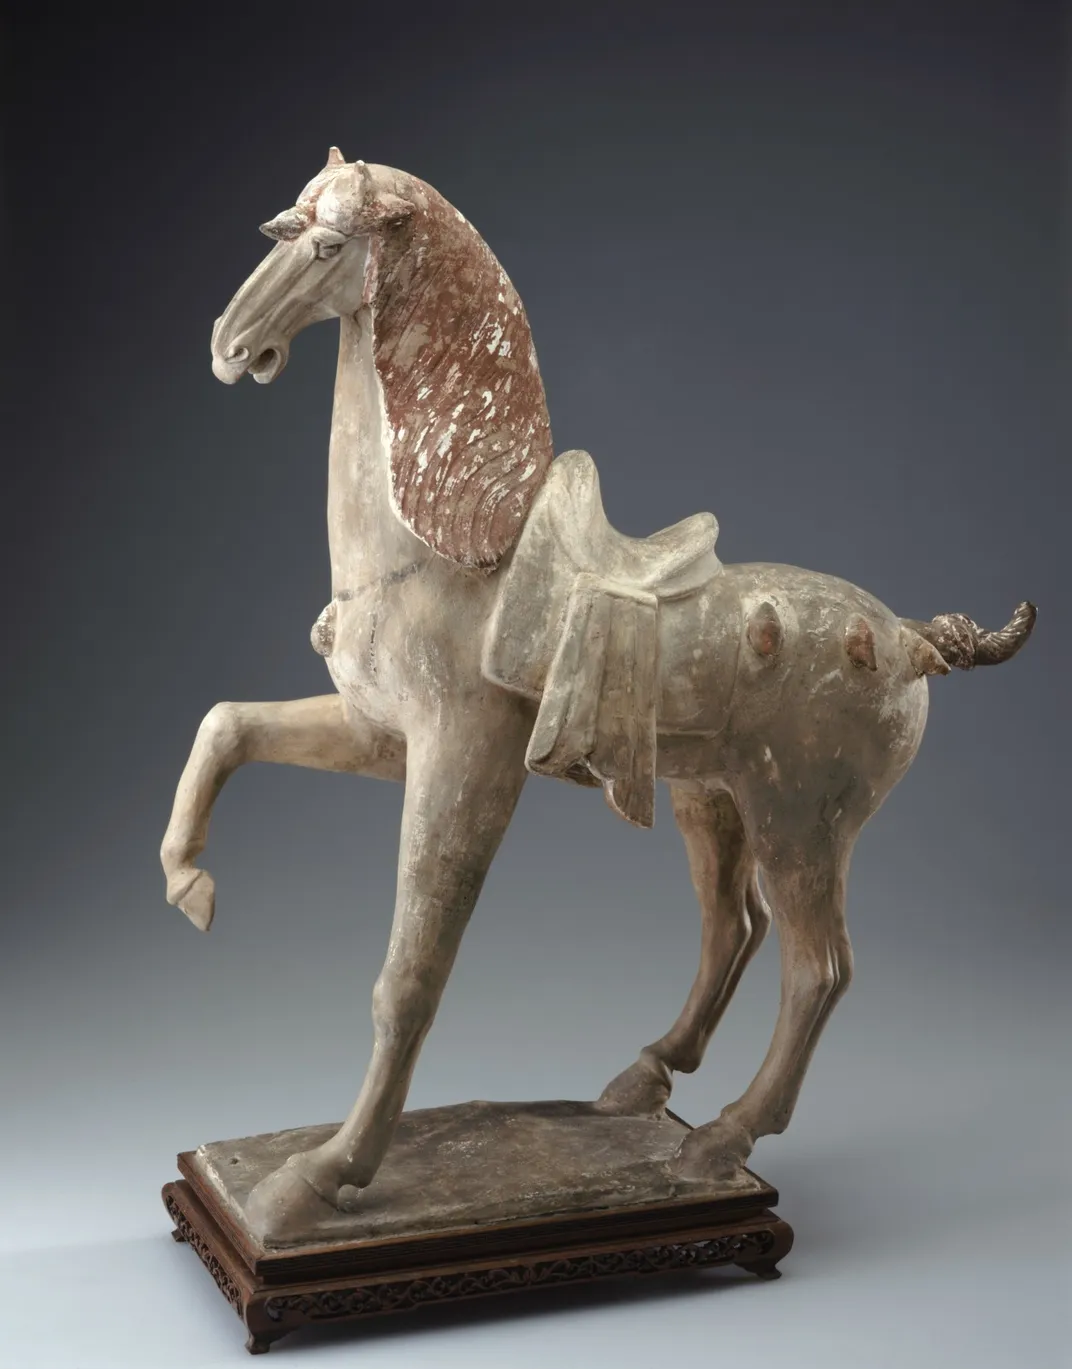 An earthenware sculpture of a horse with one hoof in the air and decorative tassels on its body and one on its forehead.